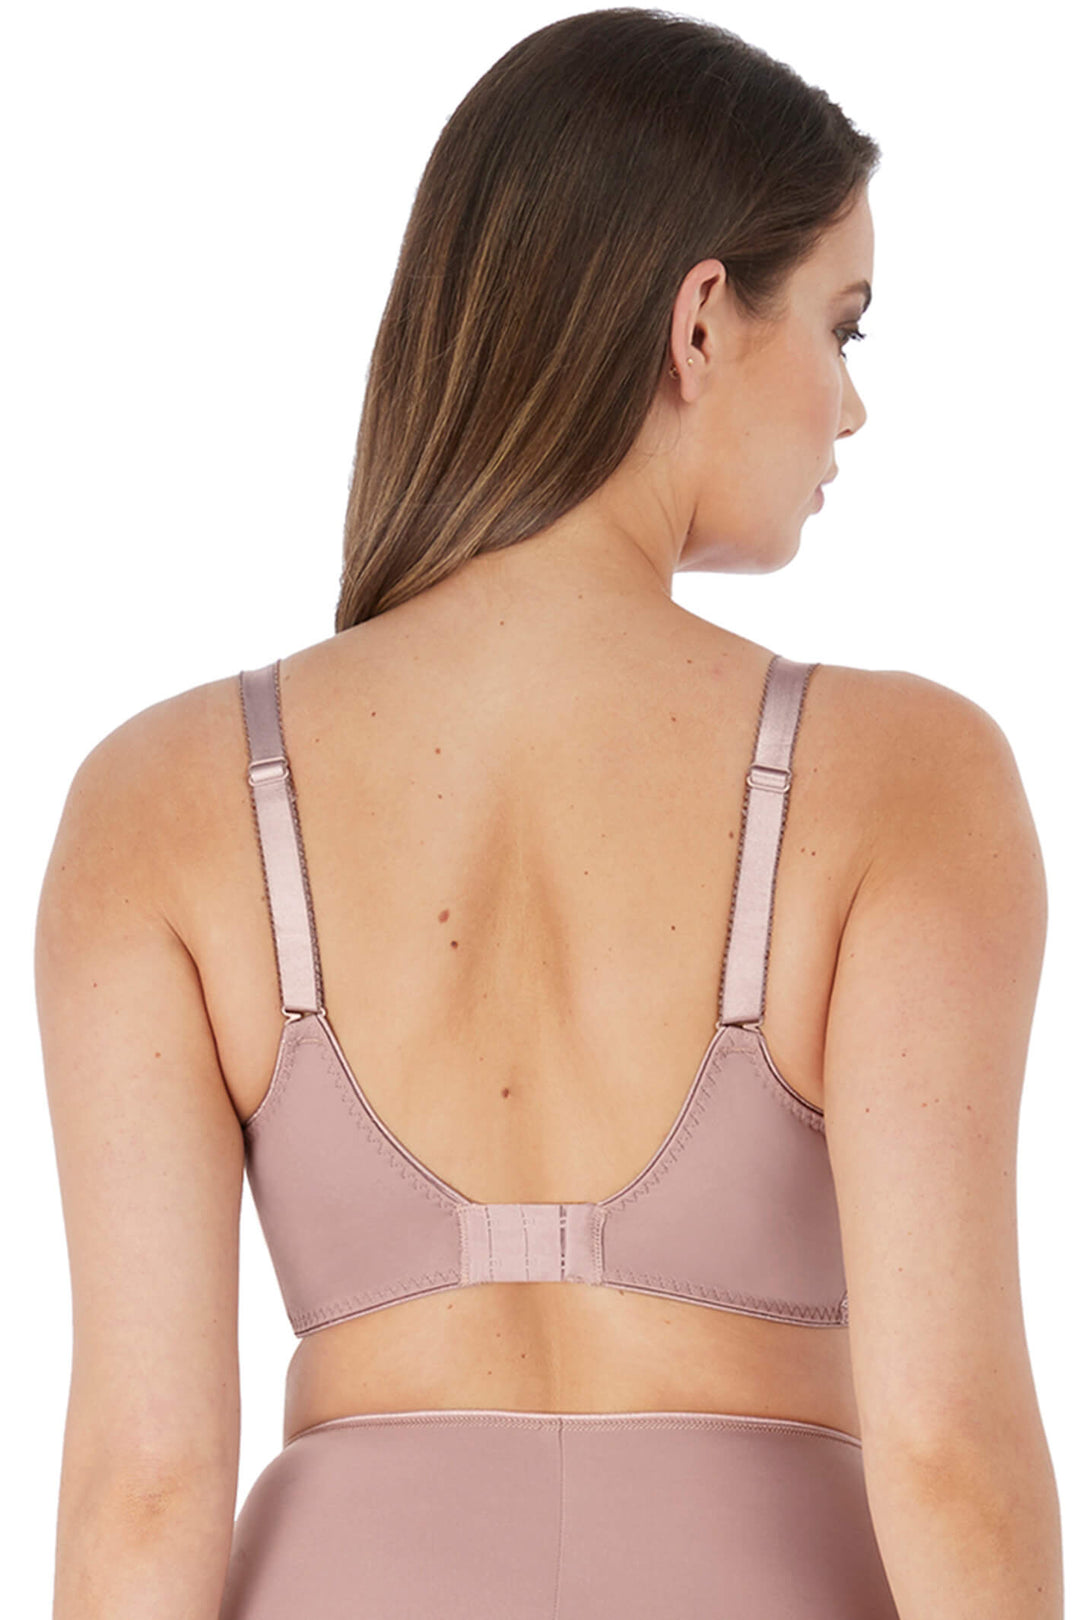 Fantasie FL6911TAE Envisage Taupe Full Cup Side Support Bra - Rouge Boutique Inverness